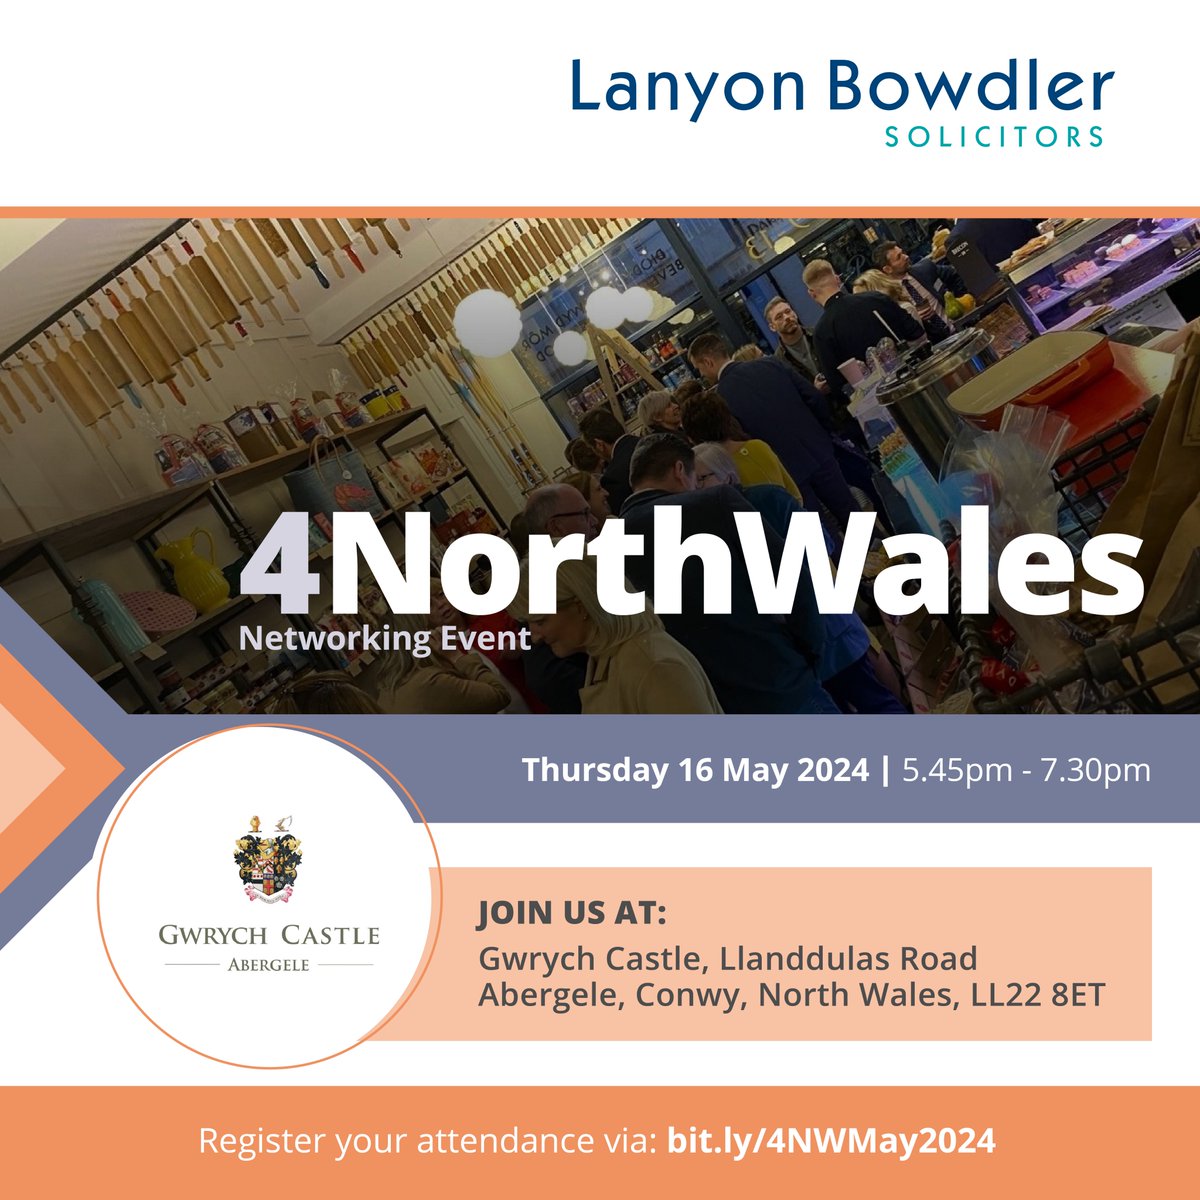 Join us at our next 4NorthWales networking event, which will be taking place at @Gwrych_Castle on Thursday 16 May 5.45pm – 7.30pm.🏰 Gwrych Castle is an imposing gothic ruin on the picturesque North Wales coastline. Book your FREE places now 👉bit.ly/4NWMay2024